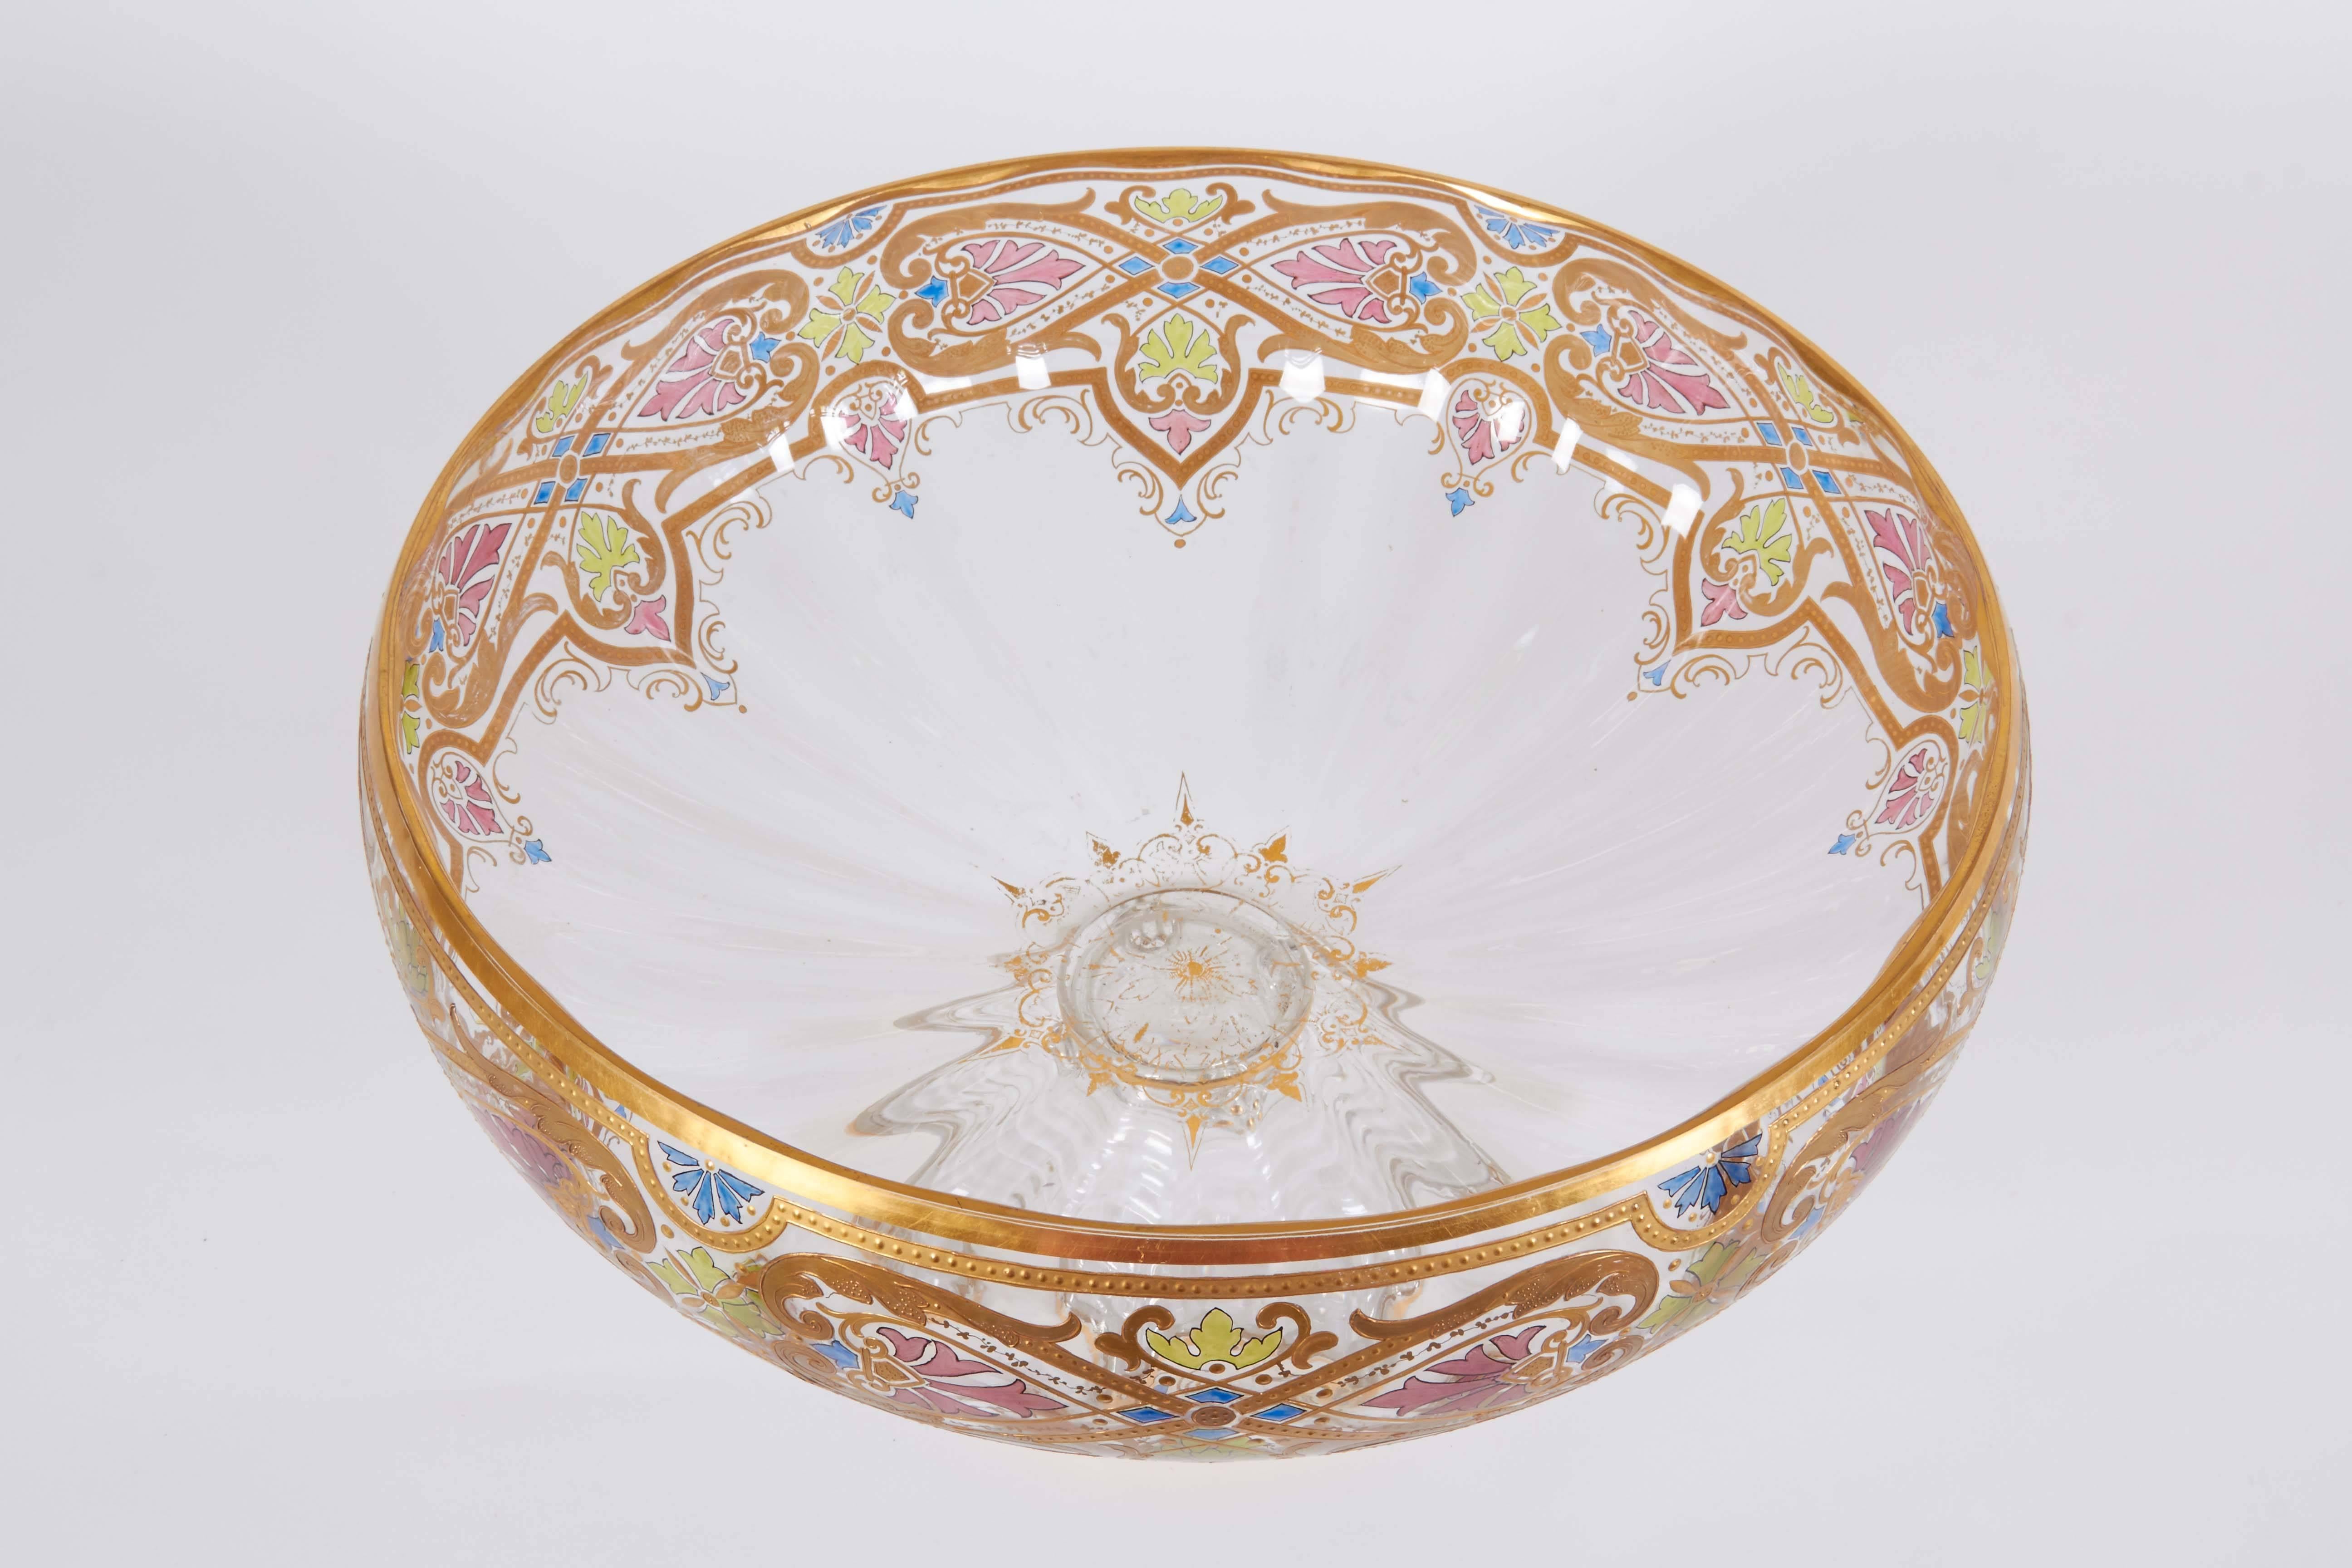 A large and impressive Art Nouveau centerpiece punch bowl set with blown glass under tray and 11 punch cups, raised gilt and enamel painted design.

Measures: Bowl: 13